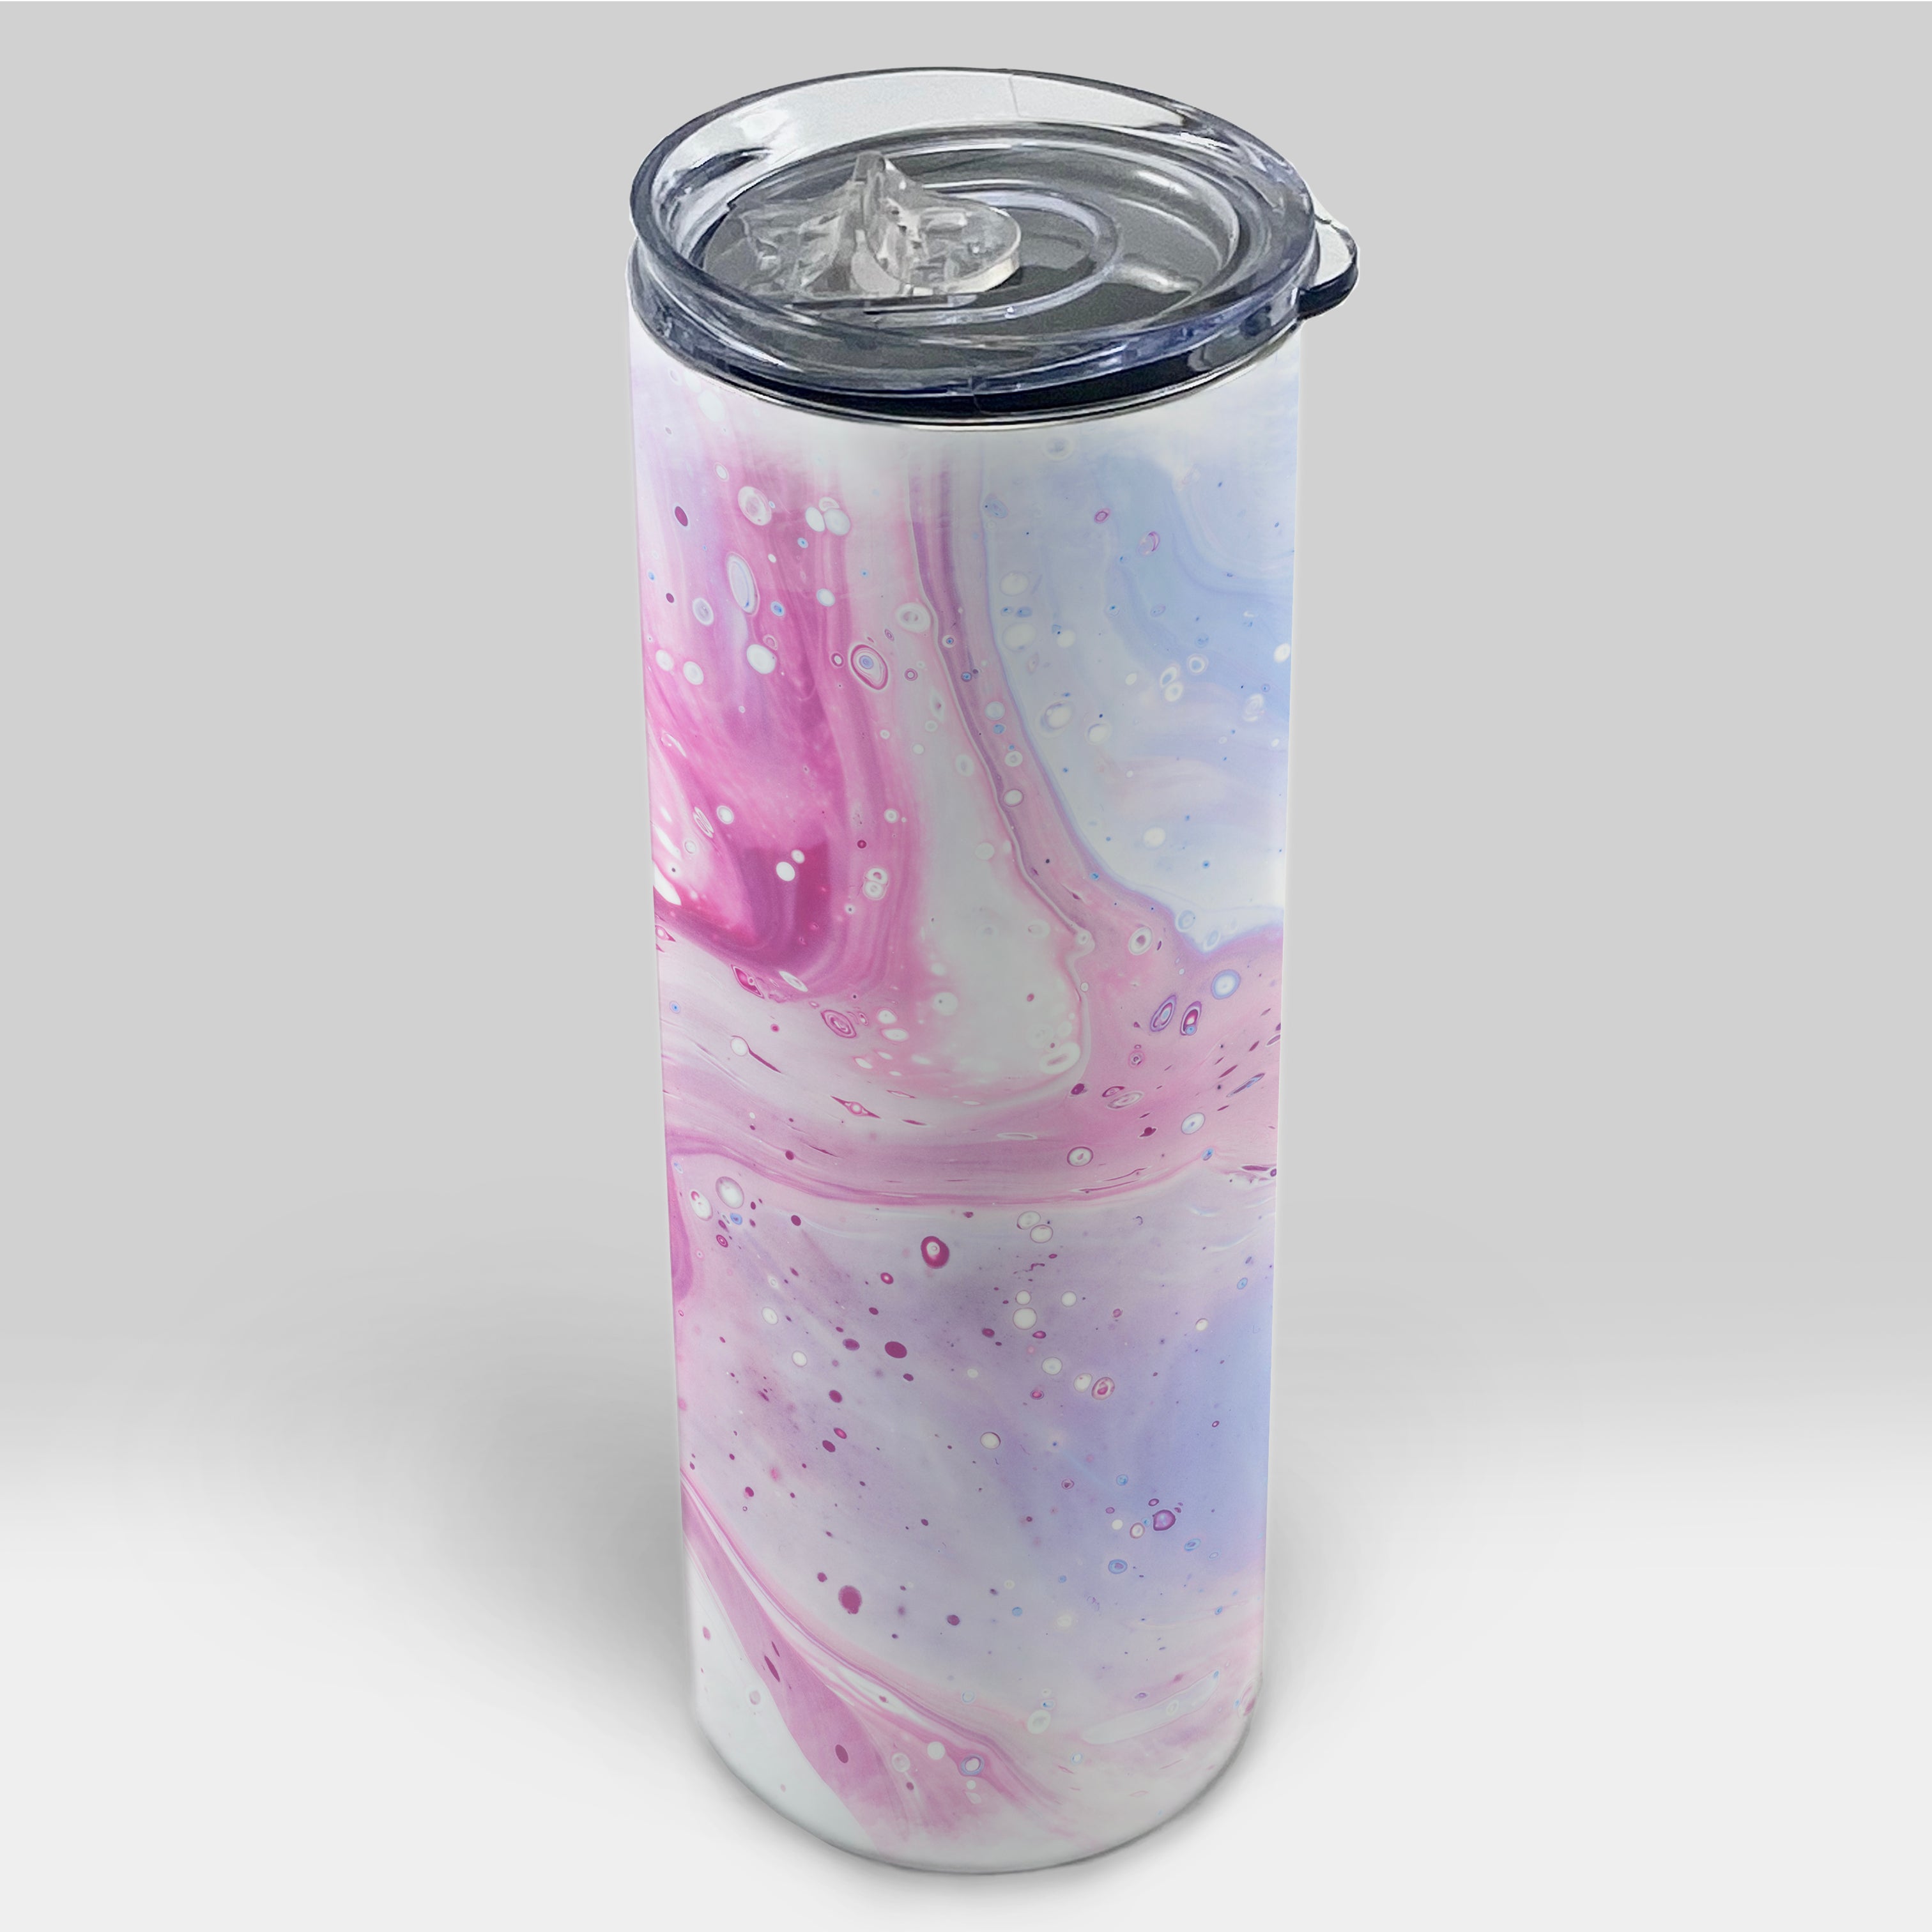 Trend Setters Original (Pink and Blue Marble) 20oz Stainless Steel Travel Tumbler with Straw